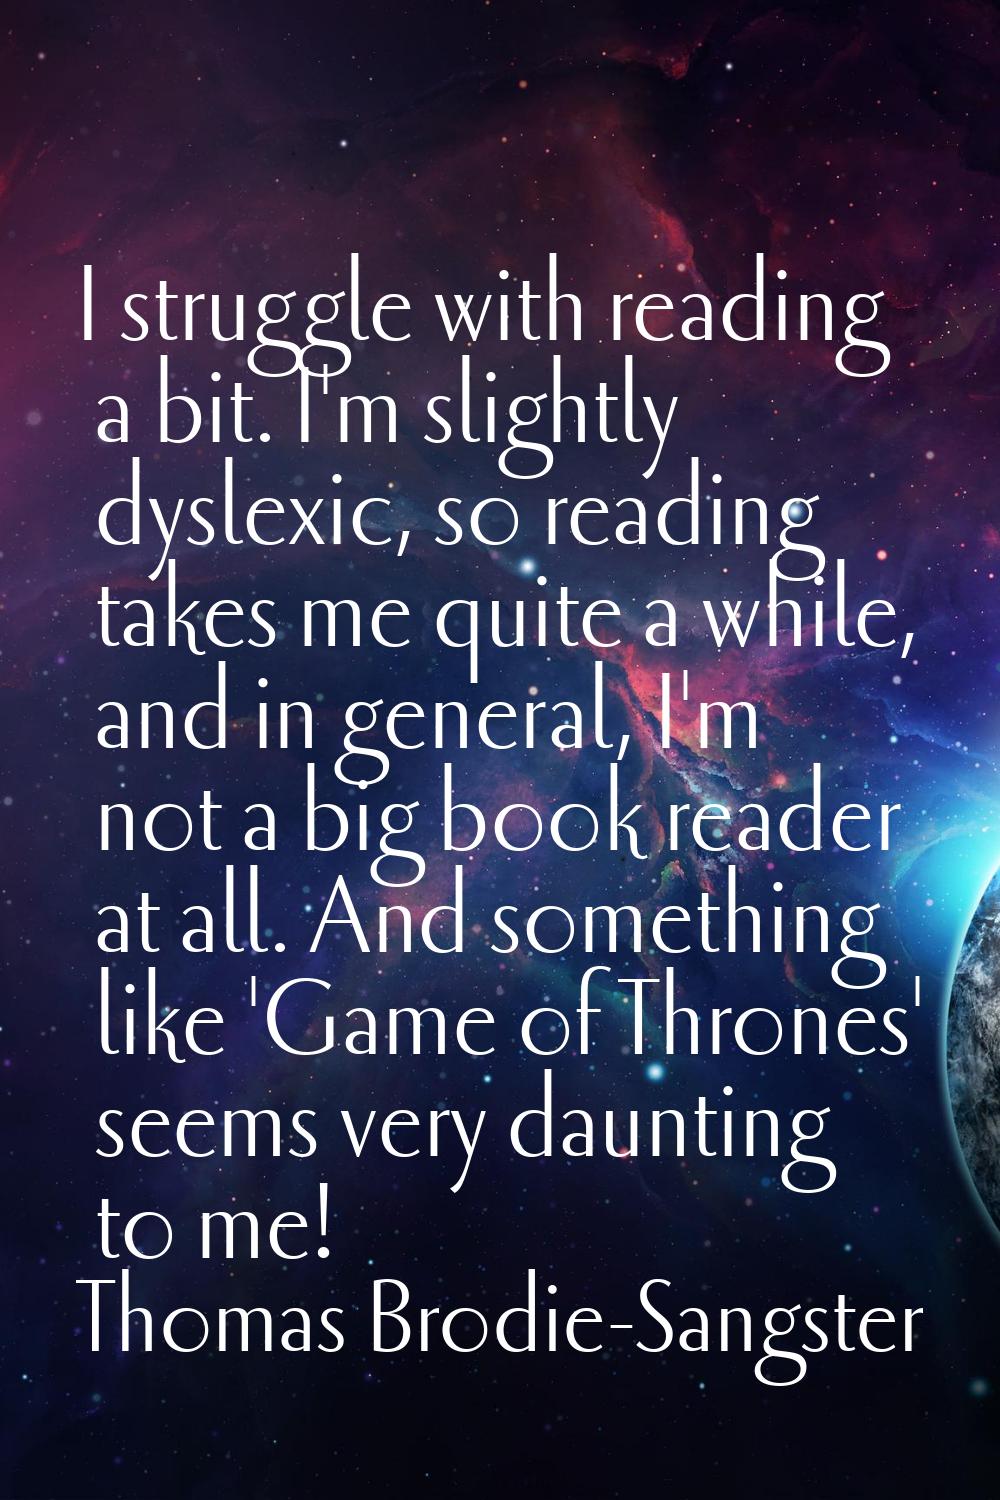 I struggle with reading a bit. I'm slightly dyslexic, so reading takes me quite a while, and in gen